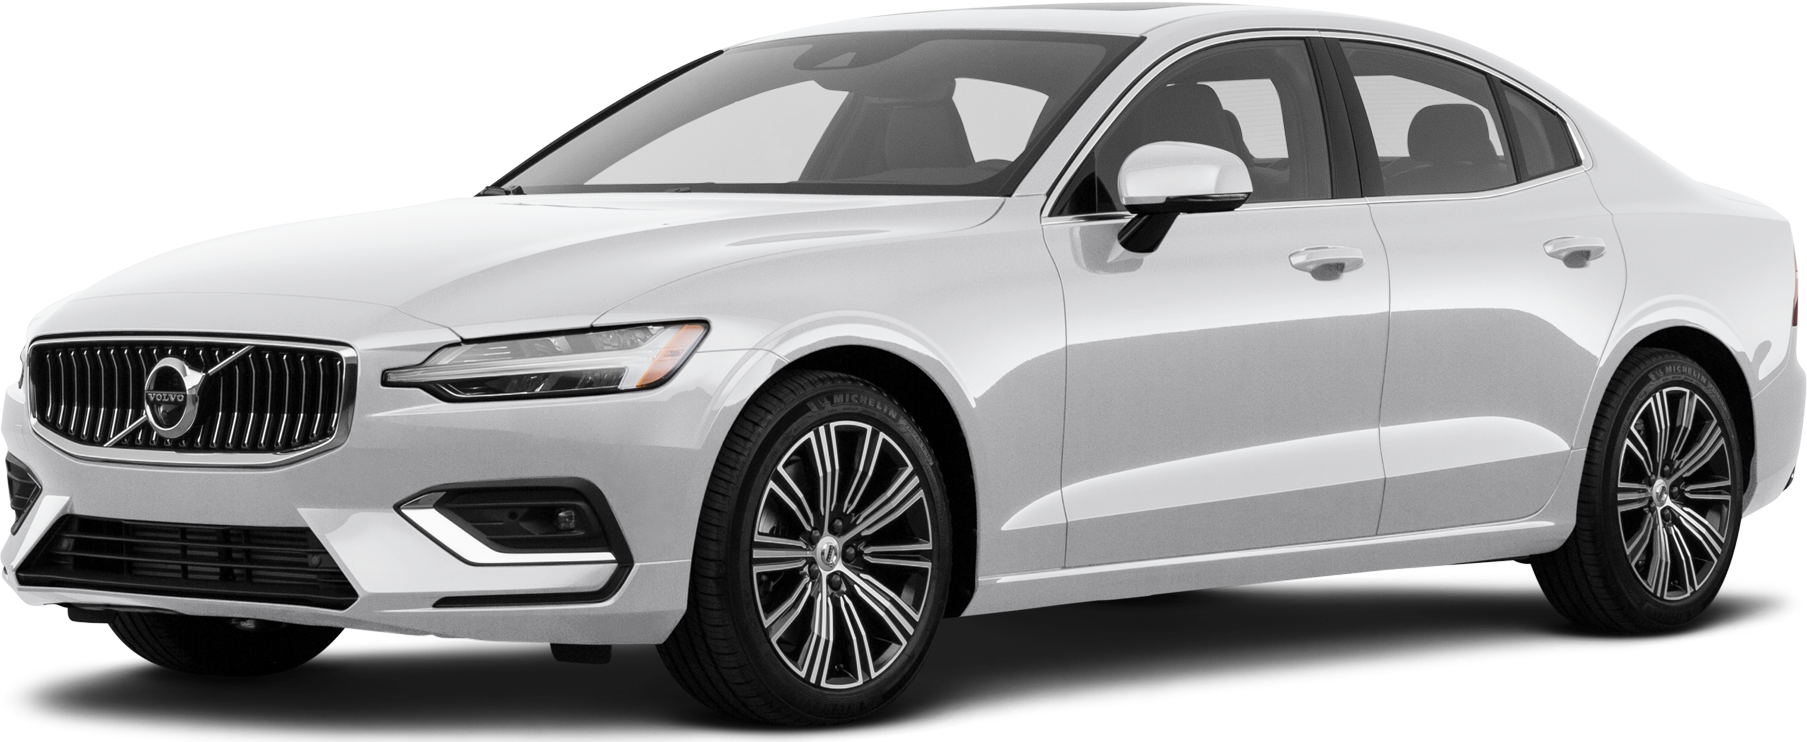 2021 Volvo S60 Reviews, Pricing & Specs | Kelley Blue Book